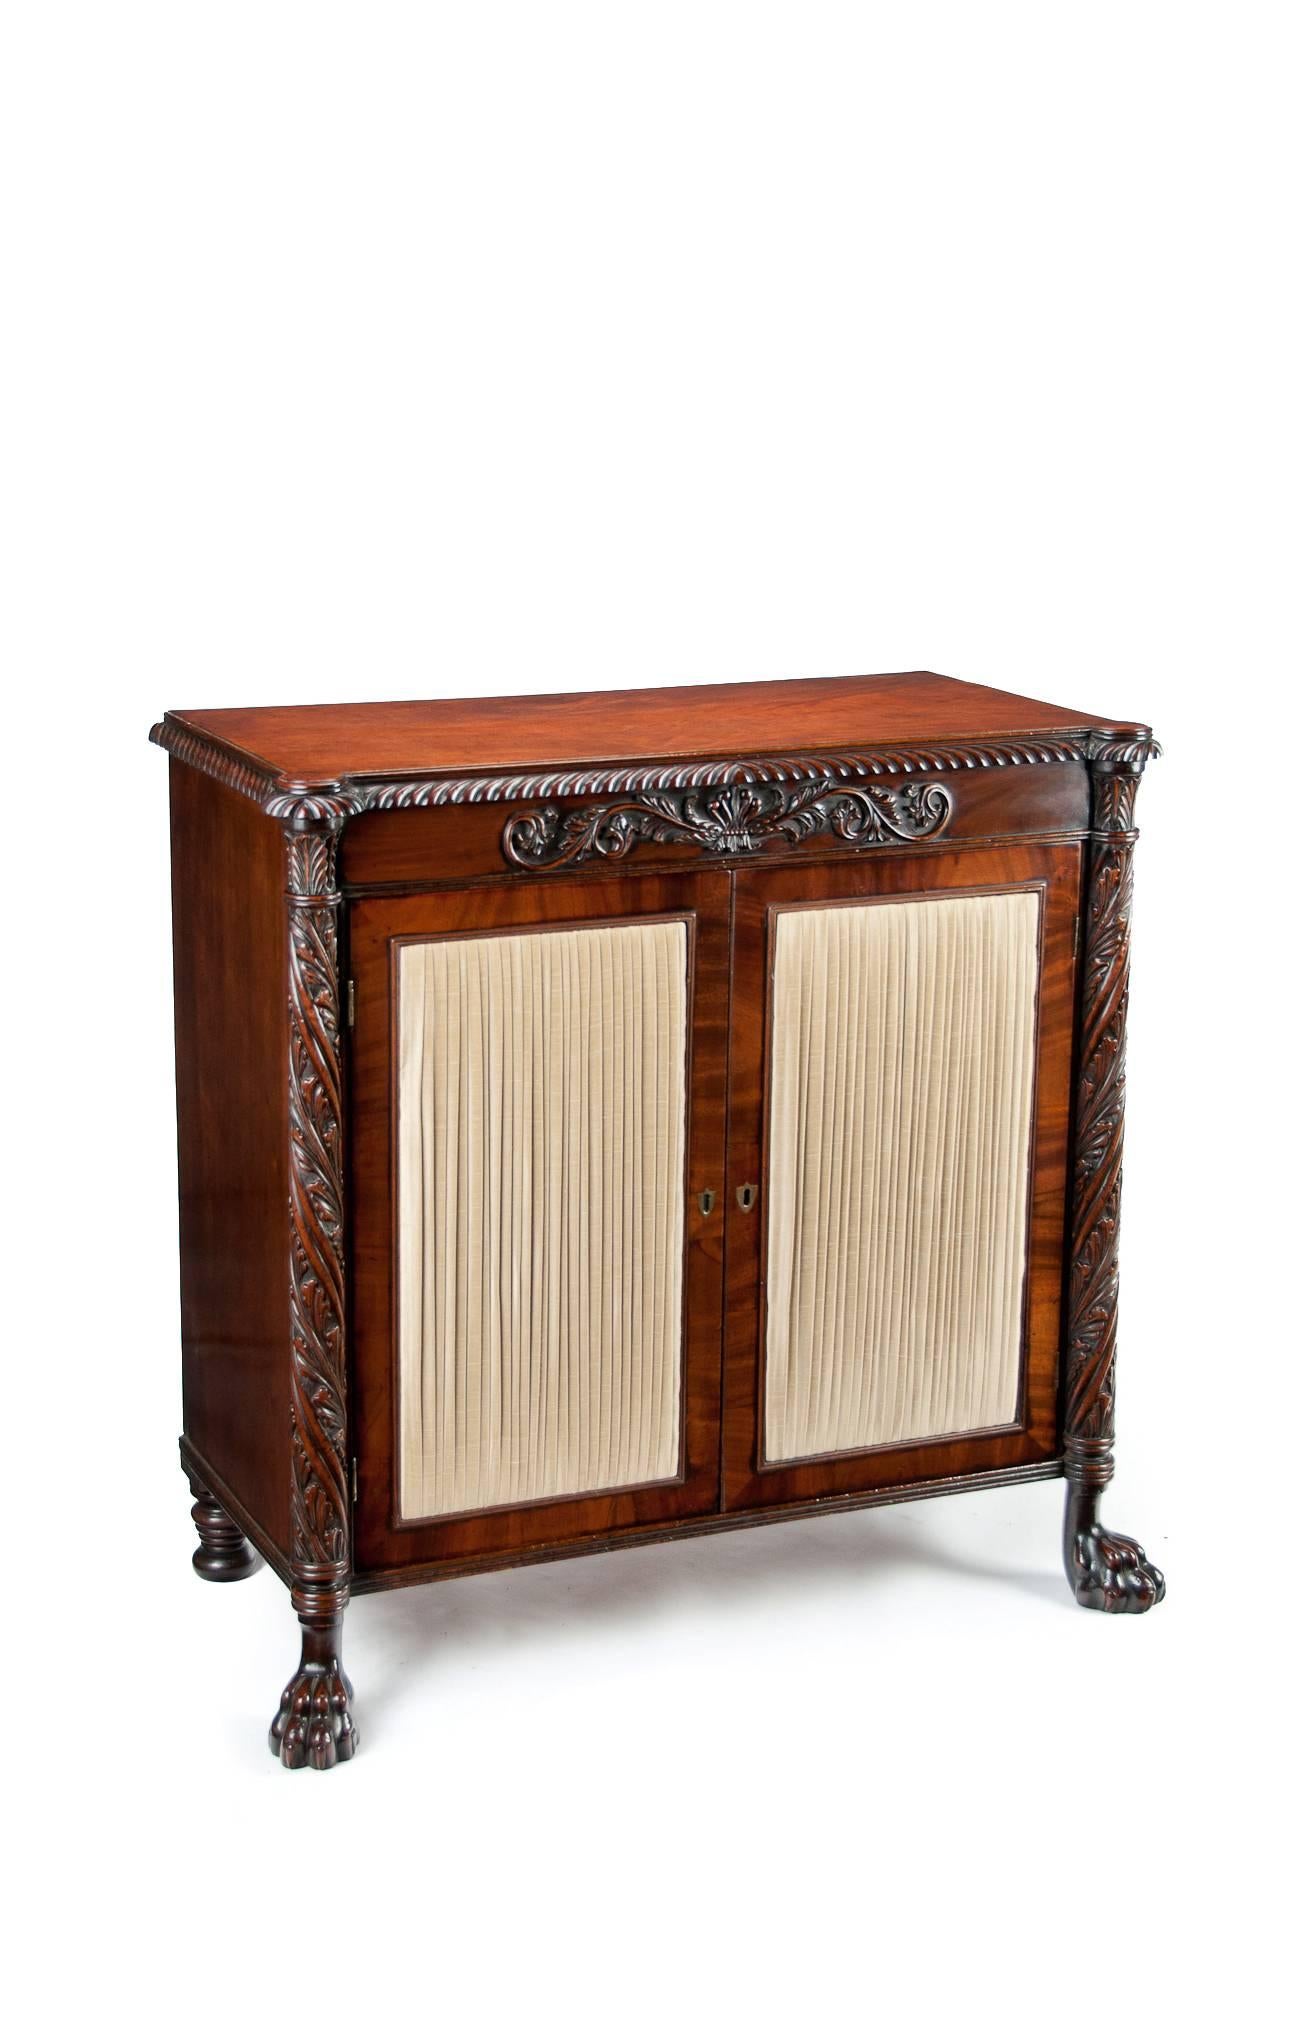 A very fine and rare Regency period Irish two door mahogany side cabinet / chiffonier dating to circa 1810.

This very elegant cabinet has been designed in the manner of George Smith and Thomas Hope having Egyptian influences. 

The solid